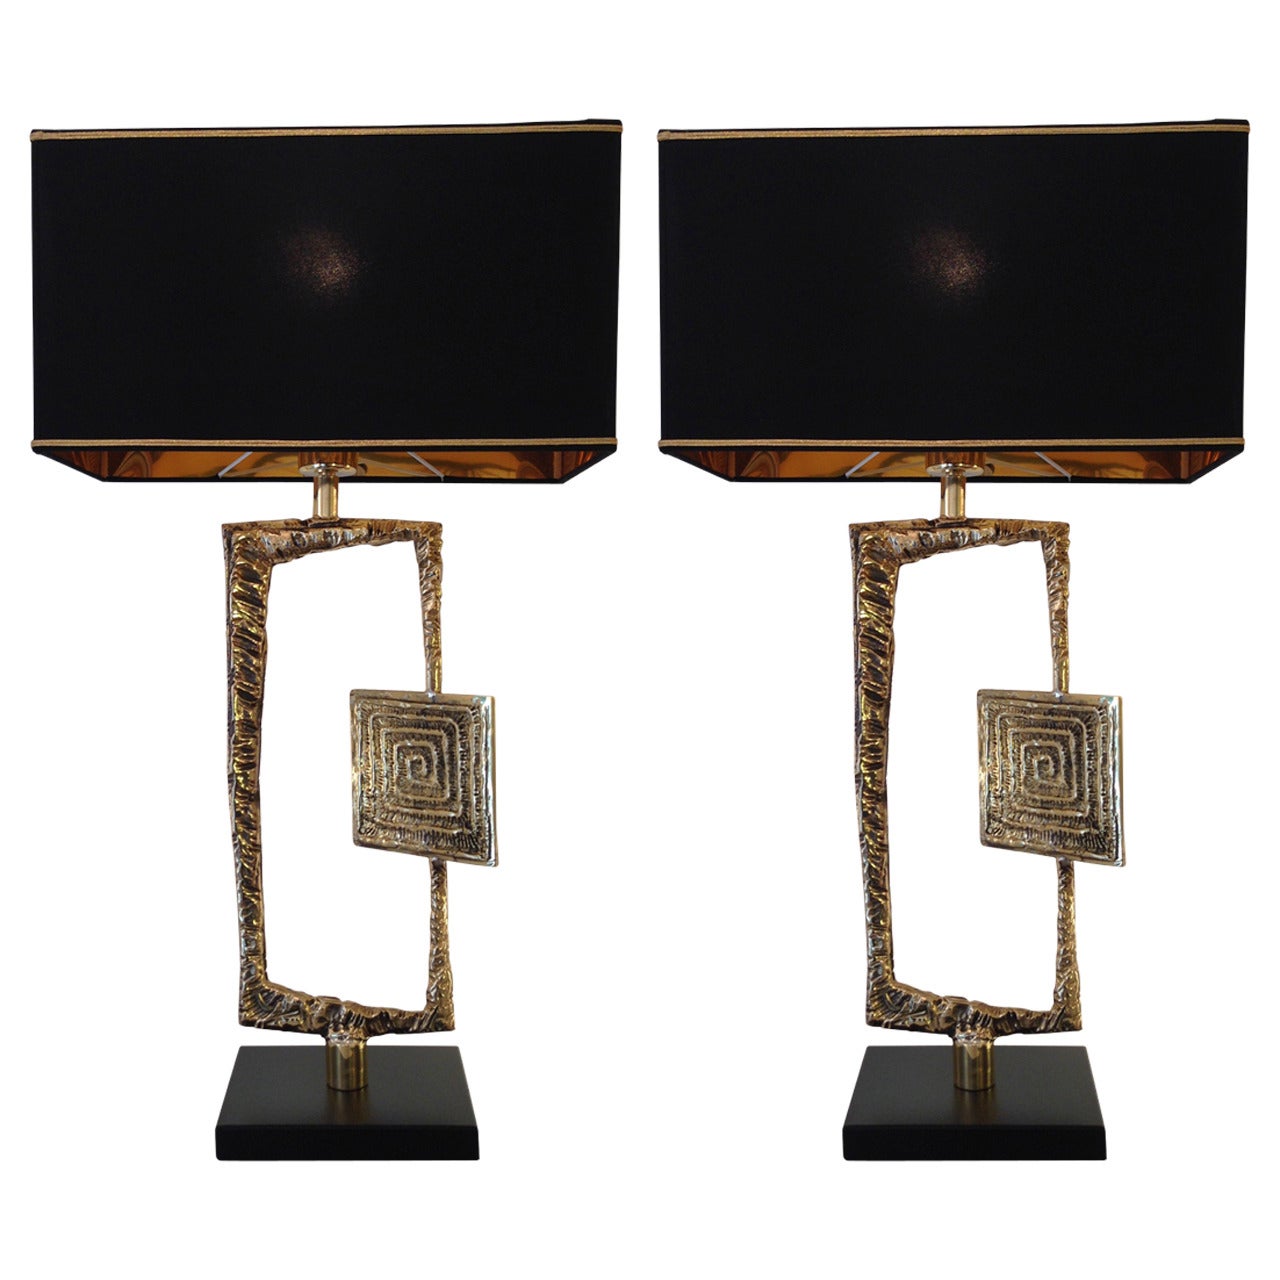 Pair of Table lamps by Angelo Brotto, circa 1980